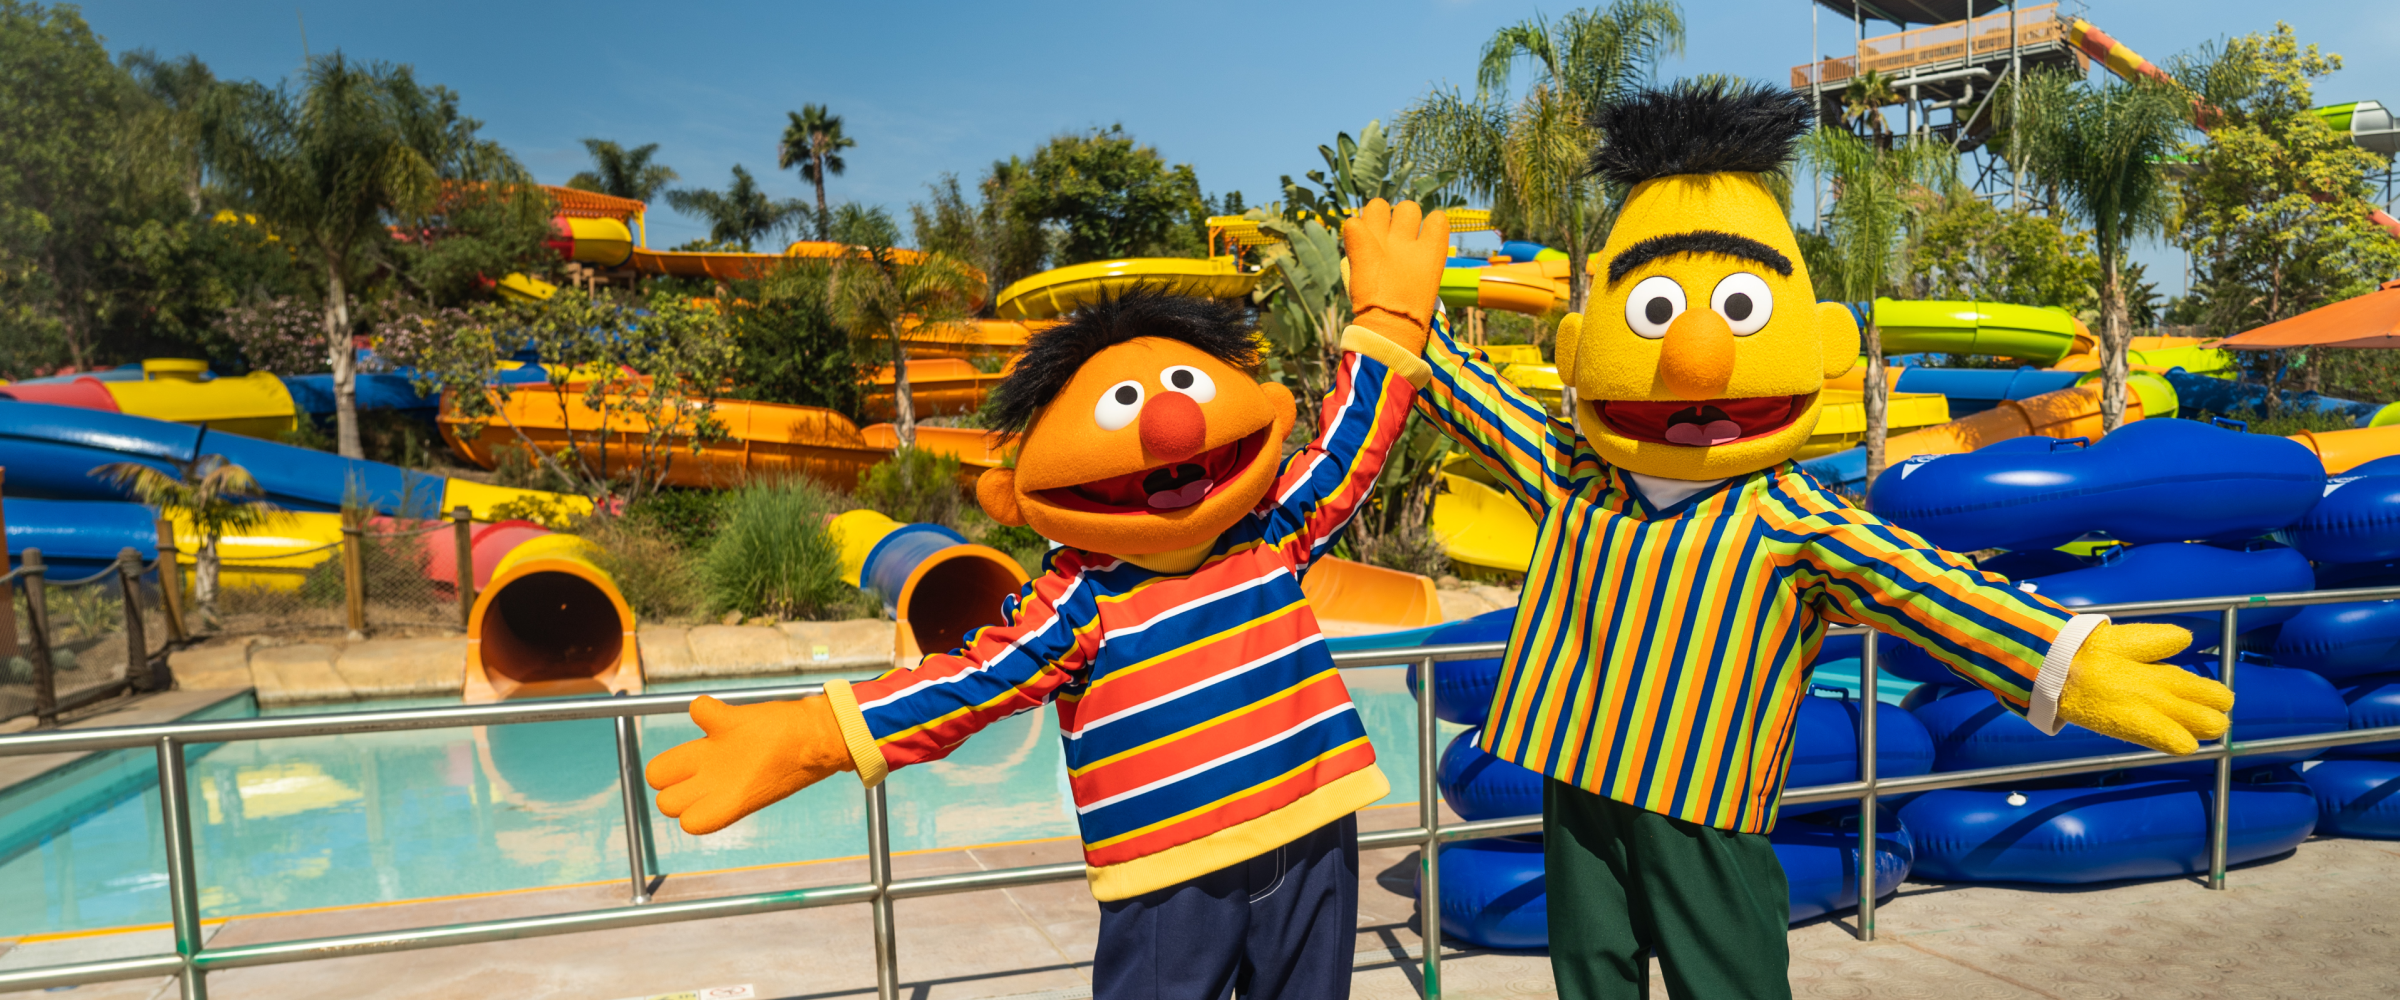 Bert & Ernie stand with open arms in from of Sesame Place water slides